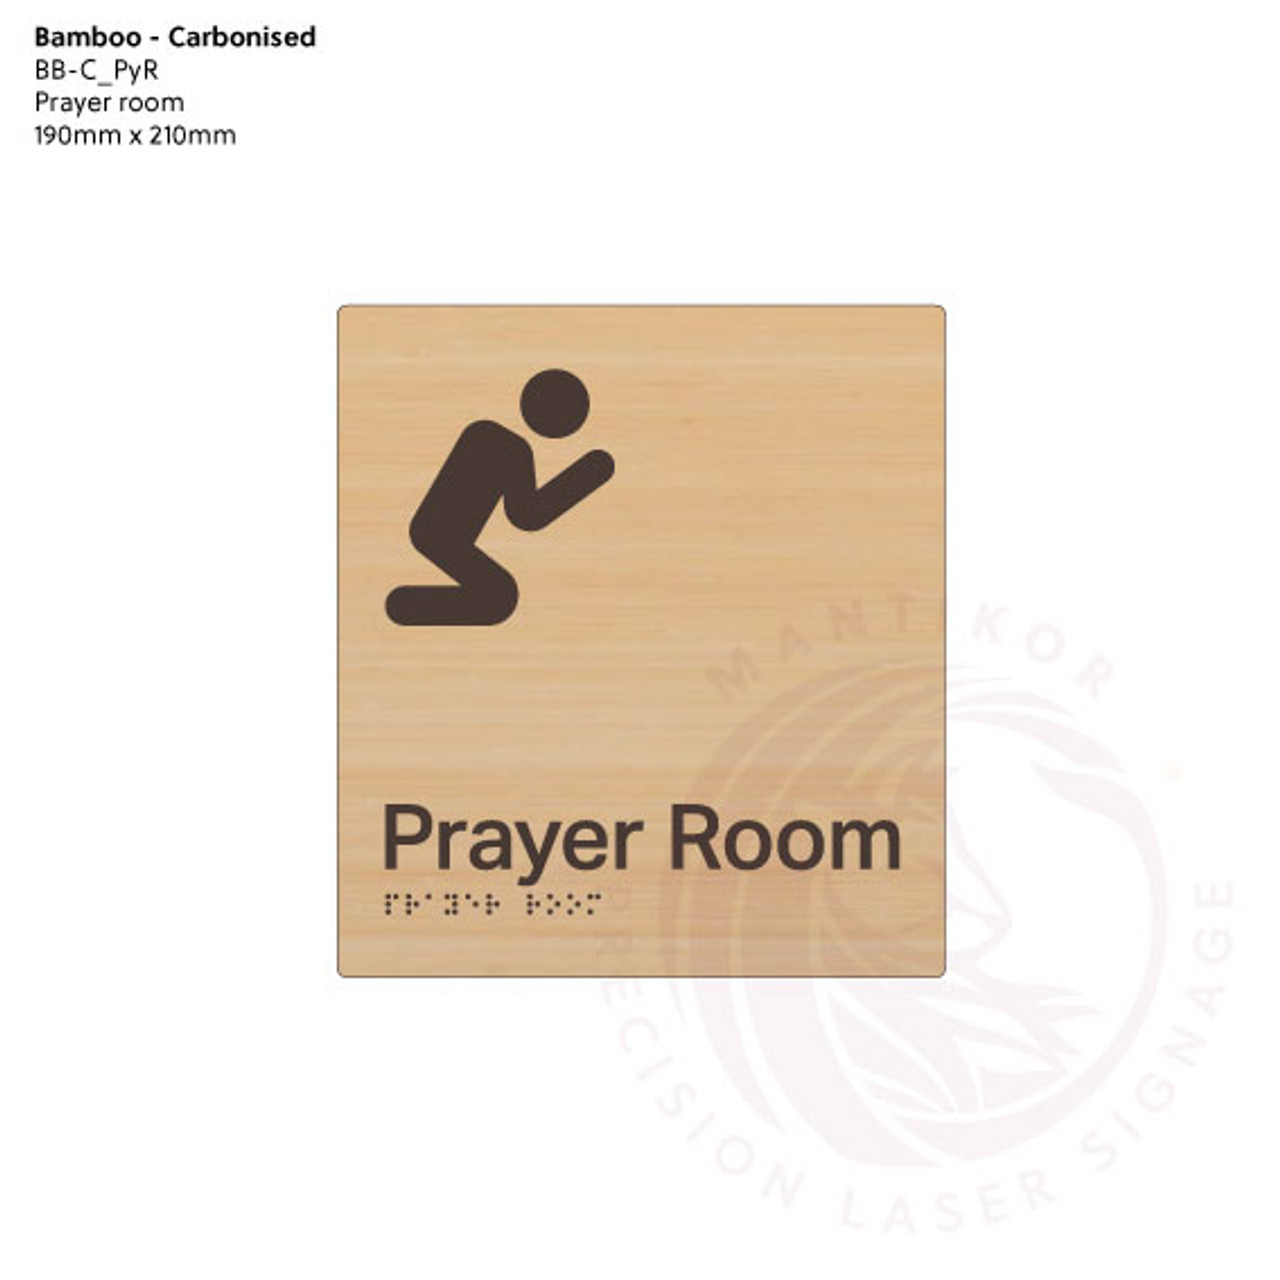 Carbonised Bamboo Tactile Braille Signs - Prayer Room